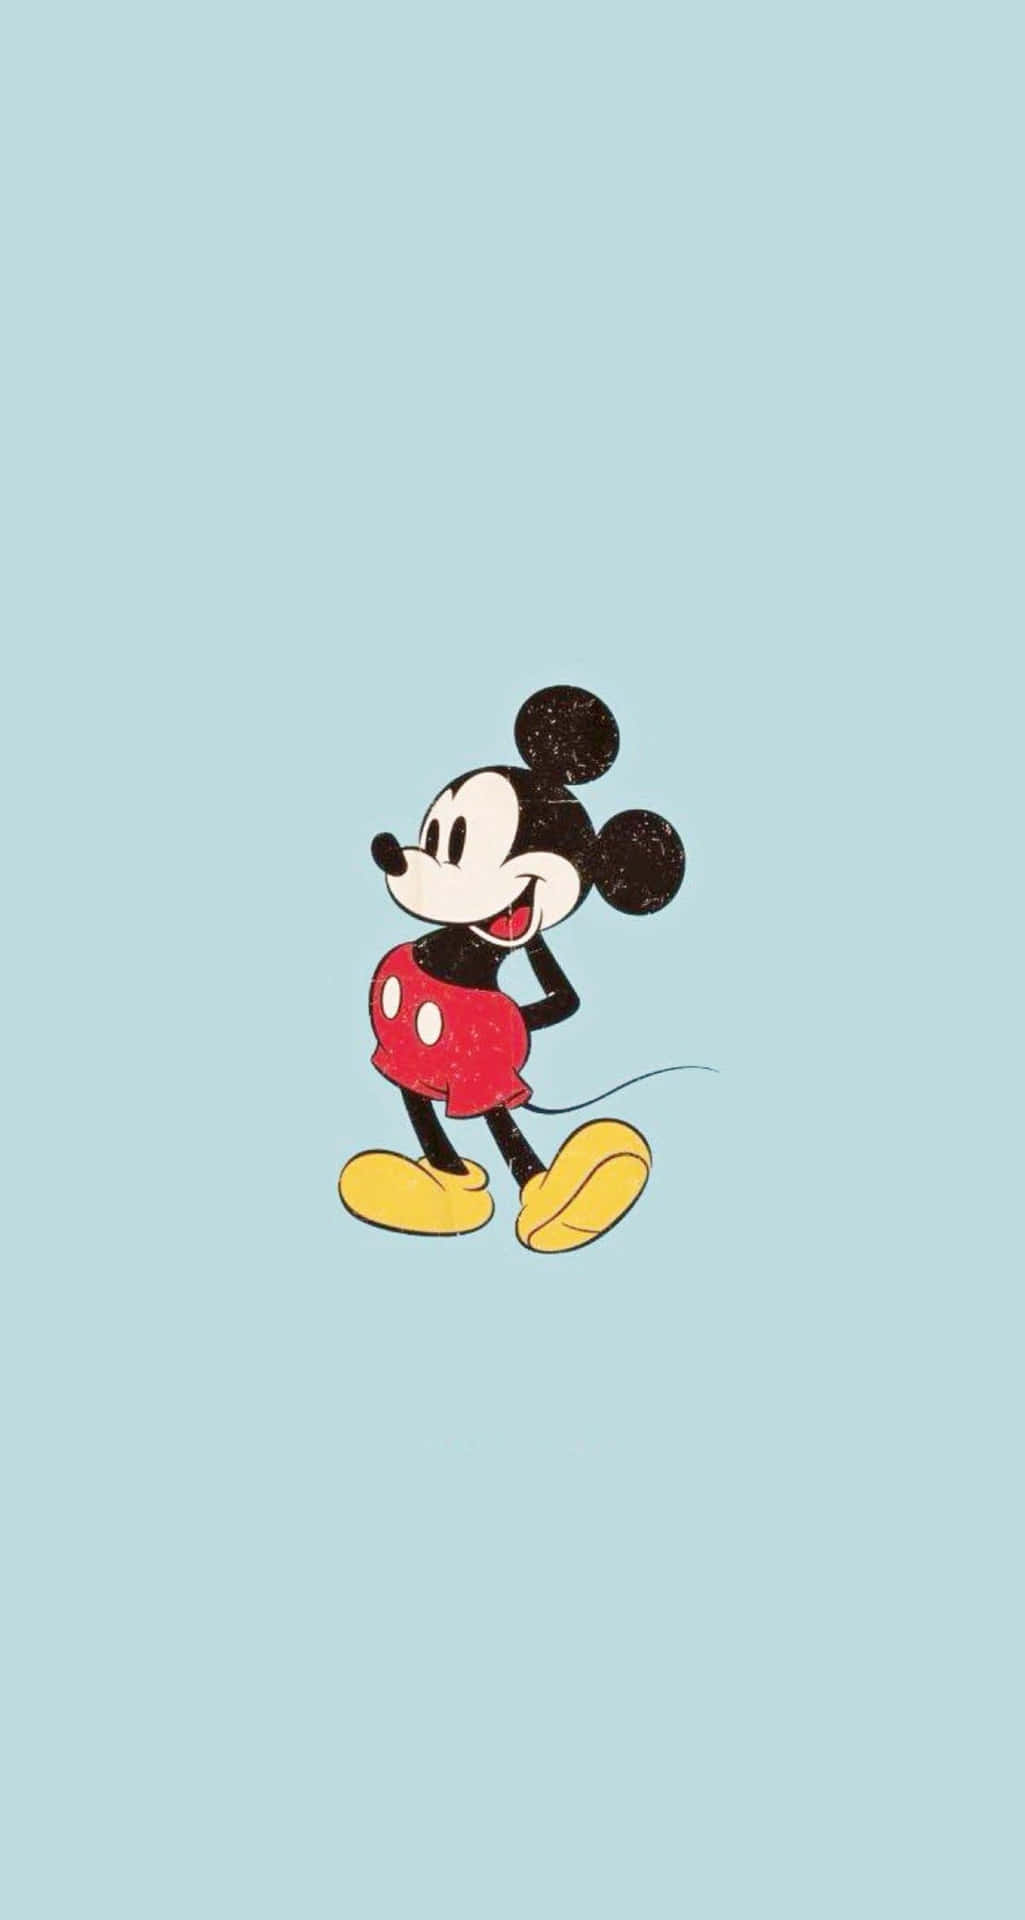 The classic Mickey Mouse — an icon of childhood and Disney entertainment.